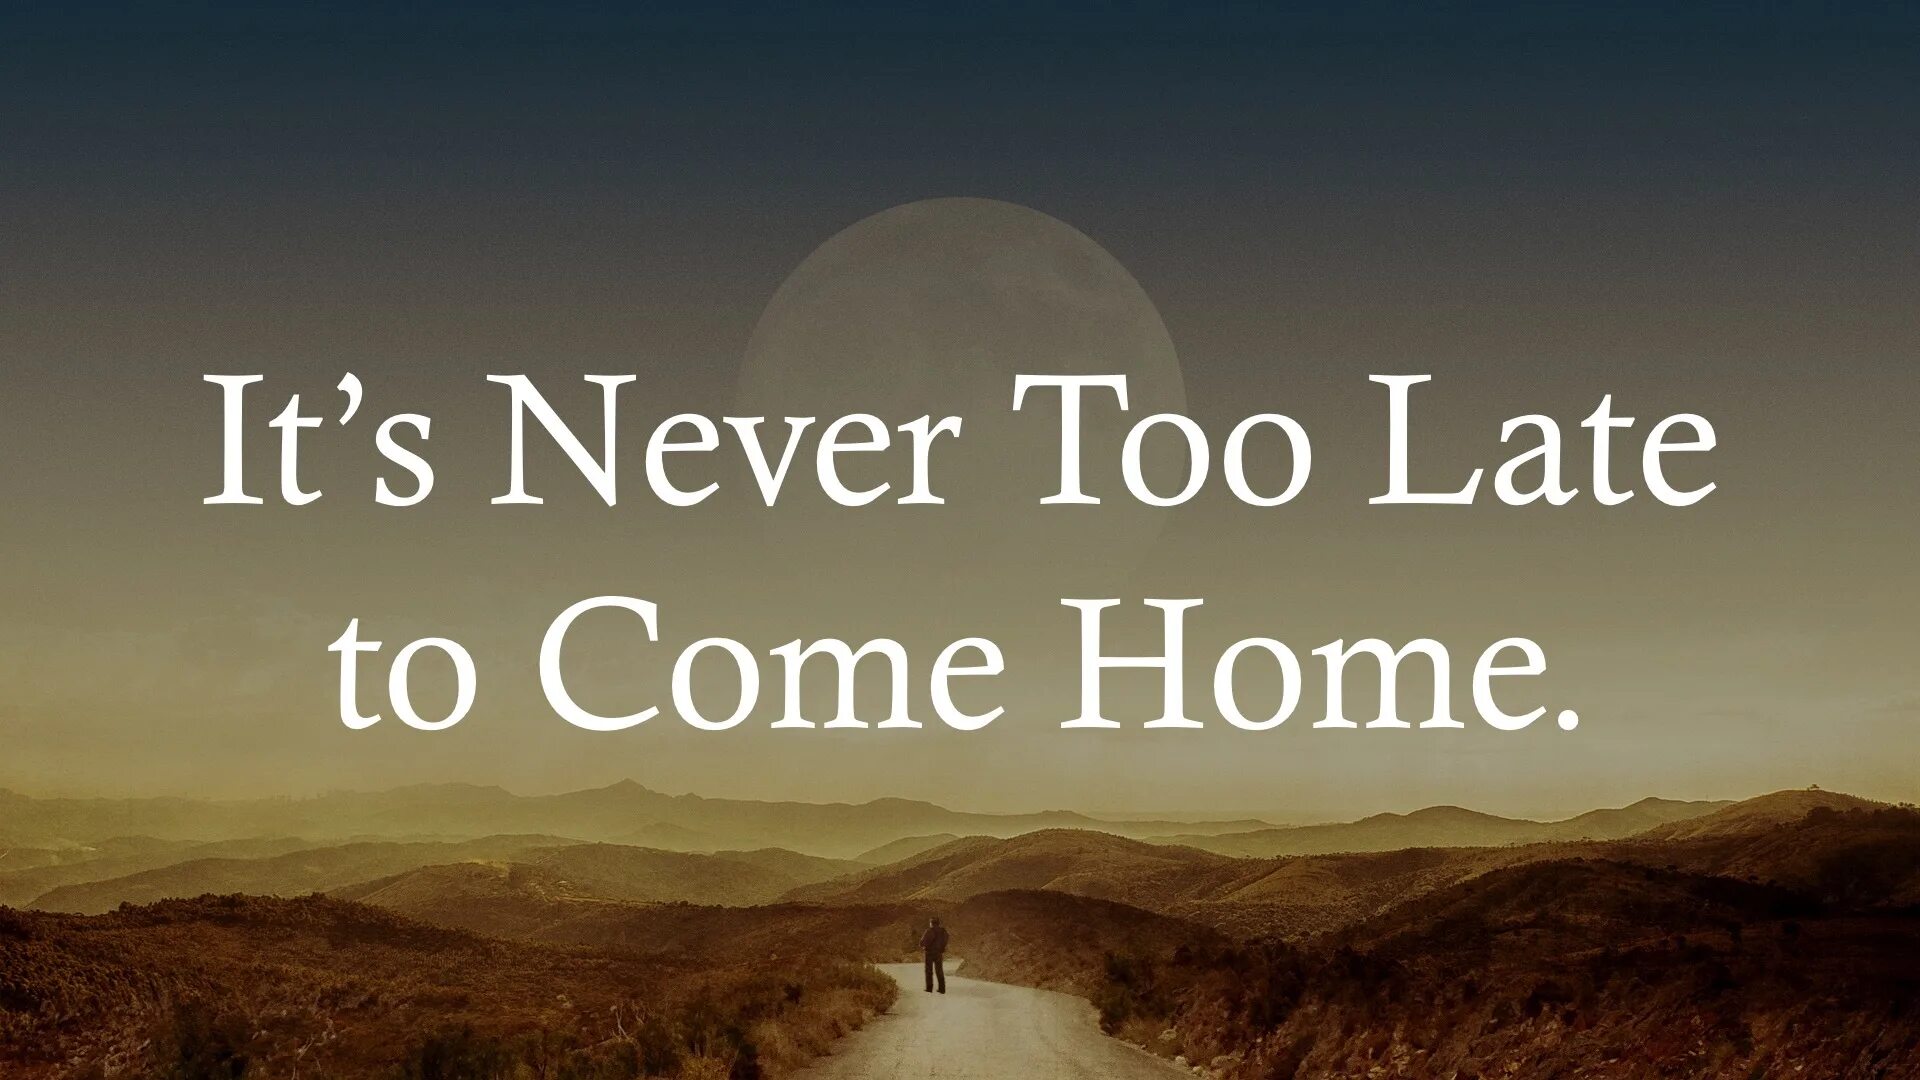 Coming later перевод. It's never too late. Never to late. Never late to learn. Come Home late.